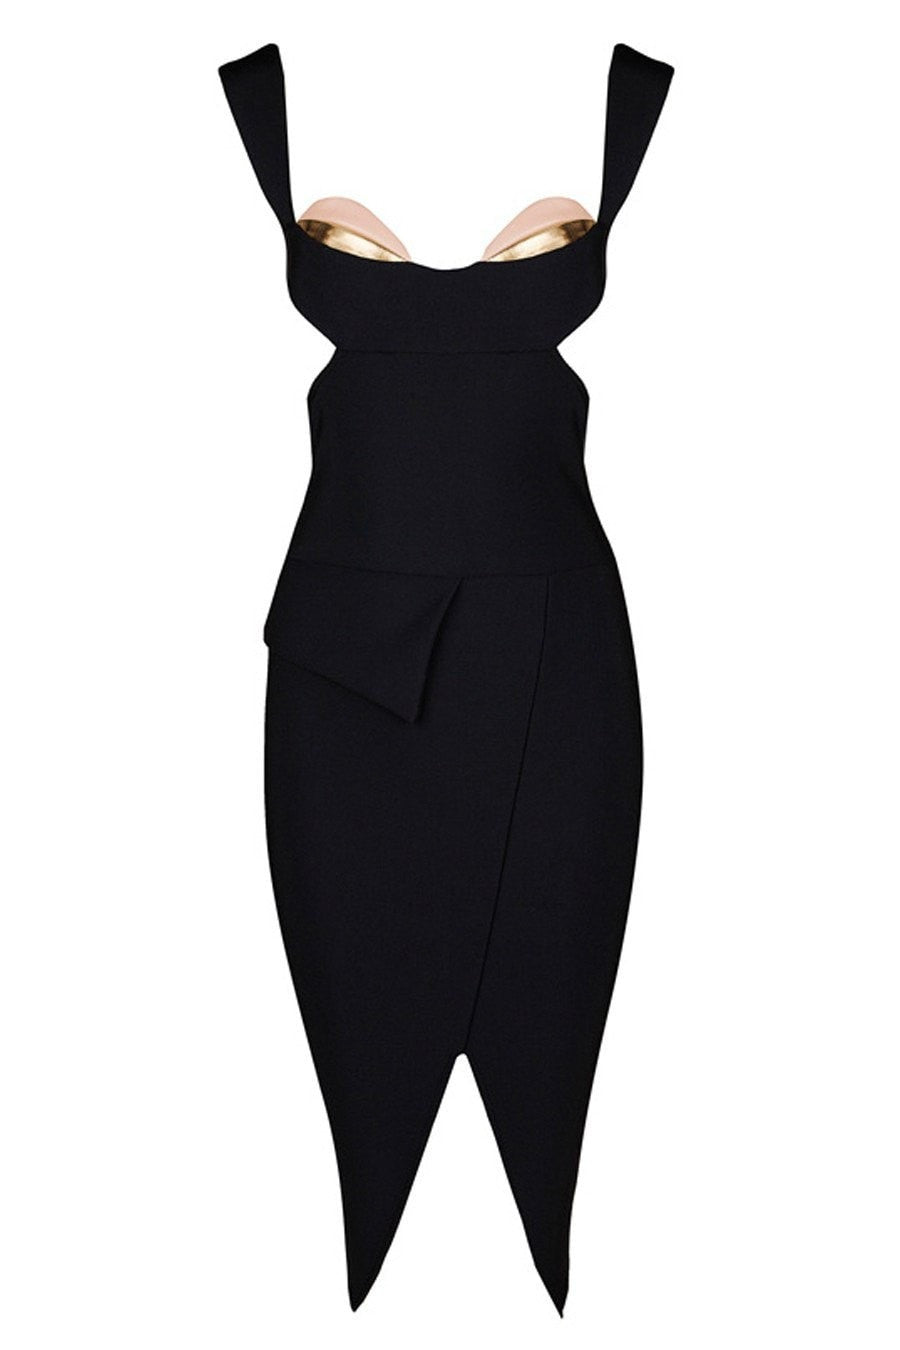 Honey Couture CARLA Designer Black Cut Out Bandage Dress Honey Couture$ AfterPay Humm ZipPay LayBuy Sezzle